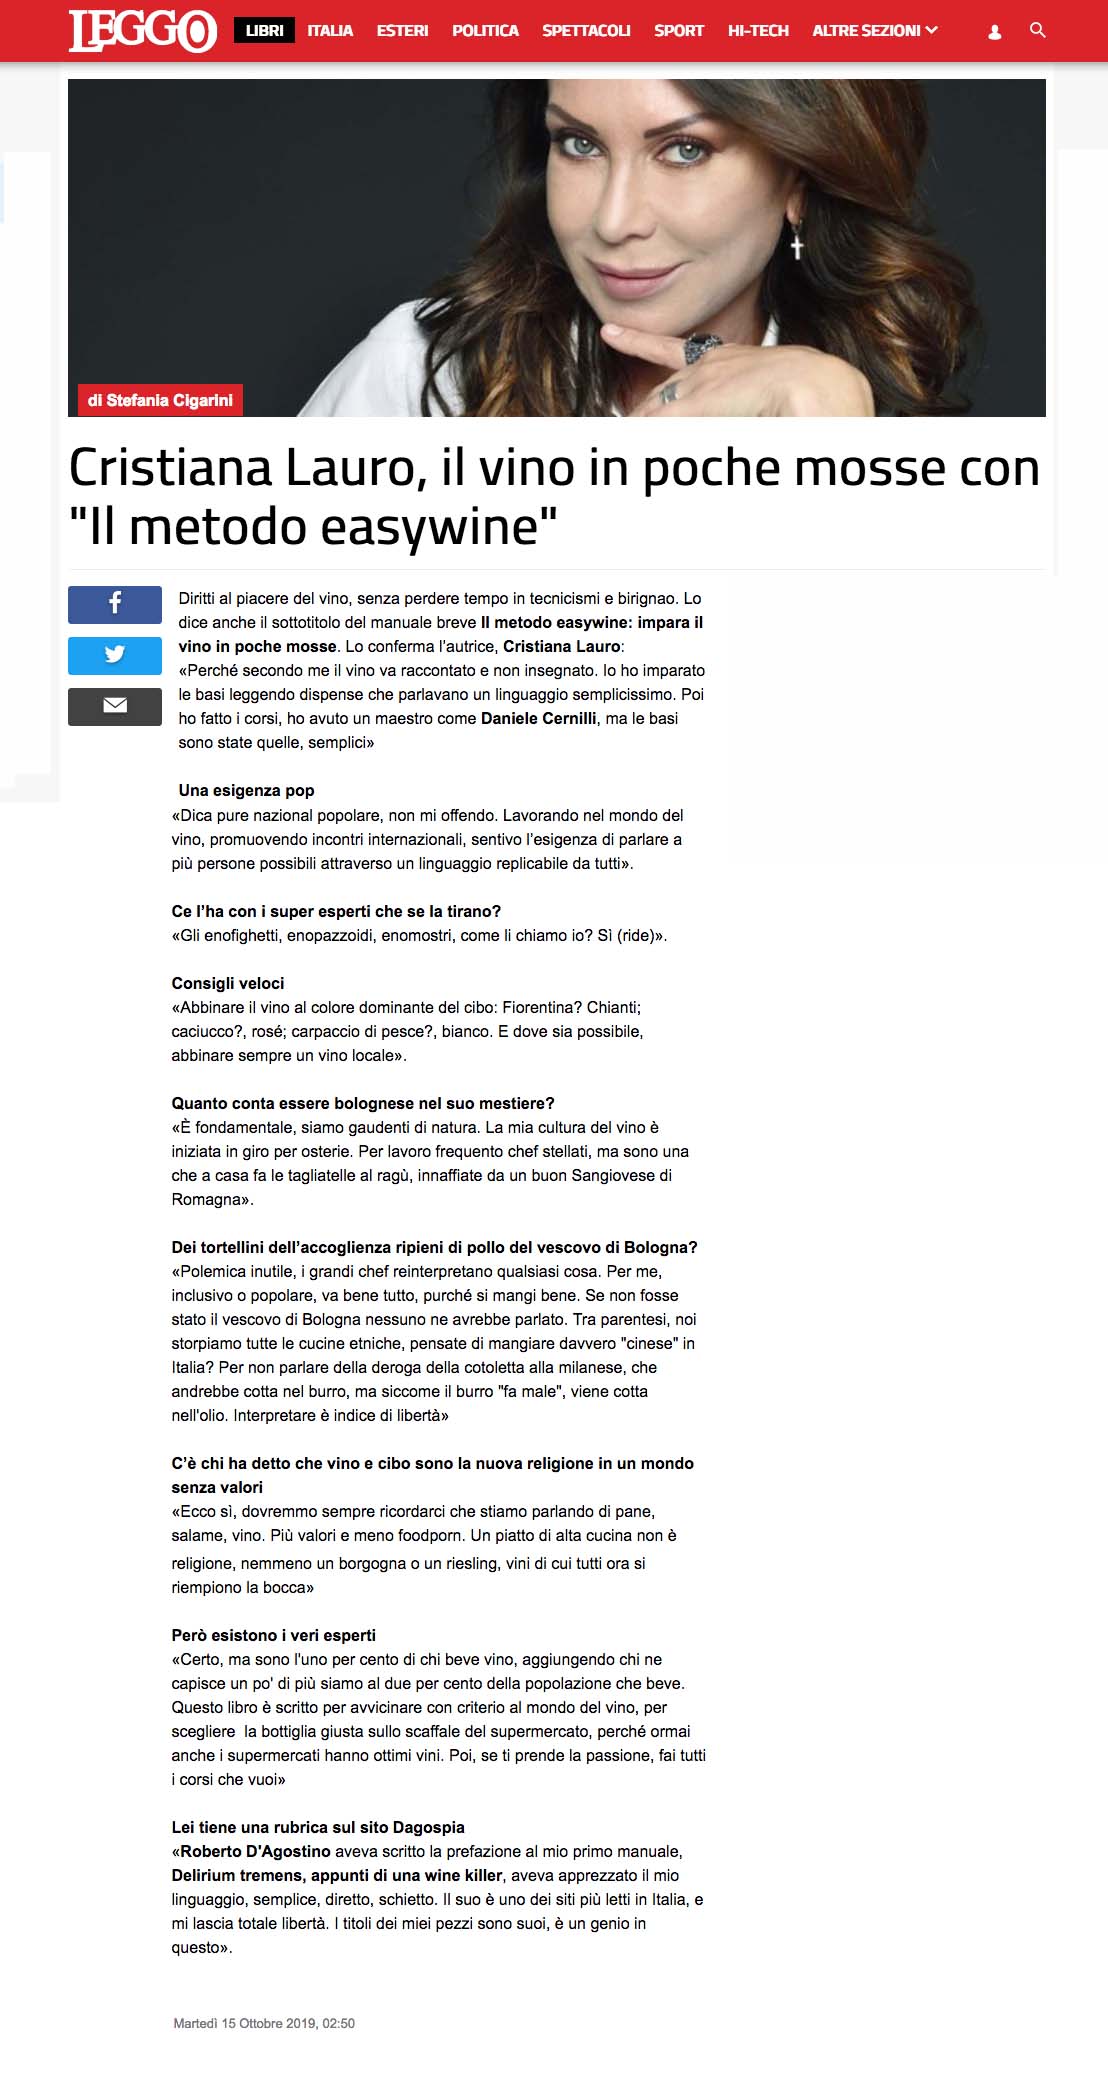 Il metodo easywine